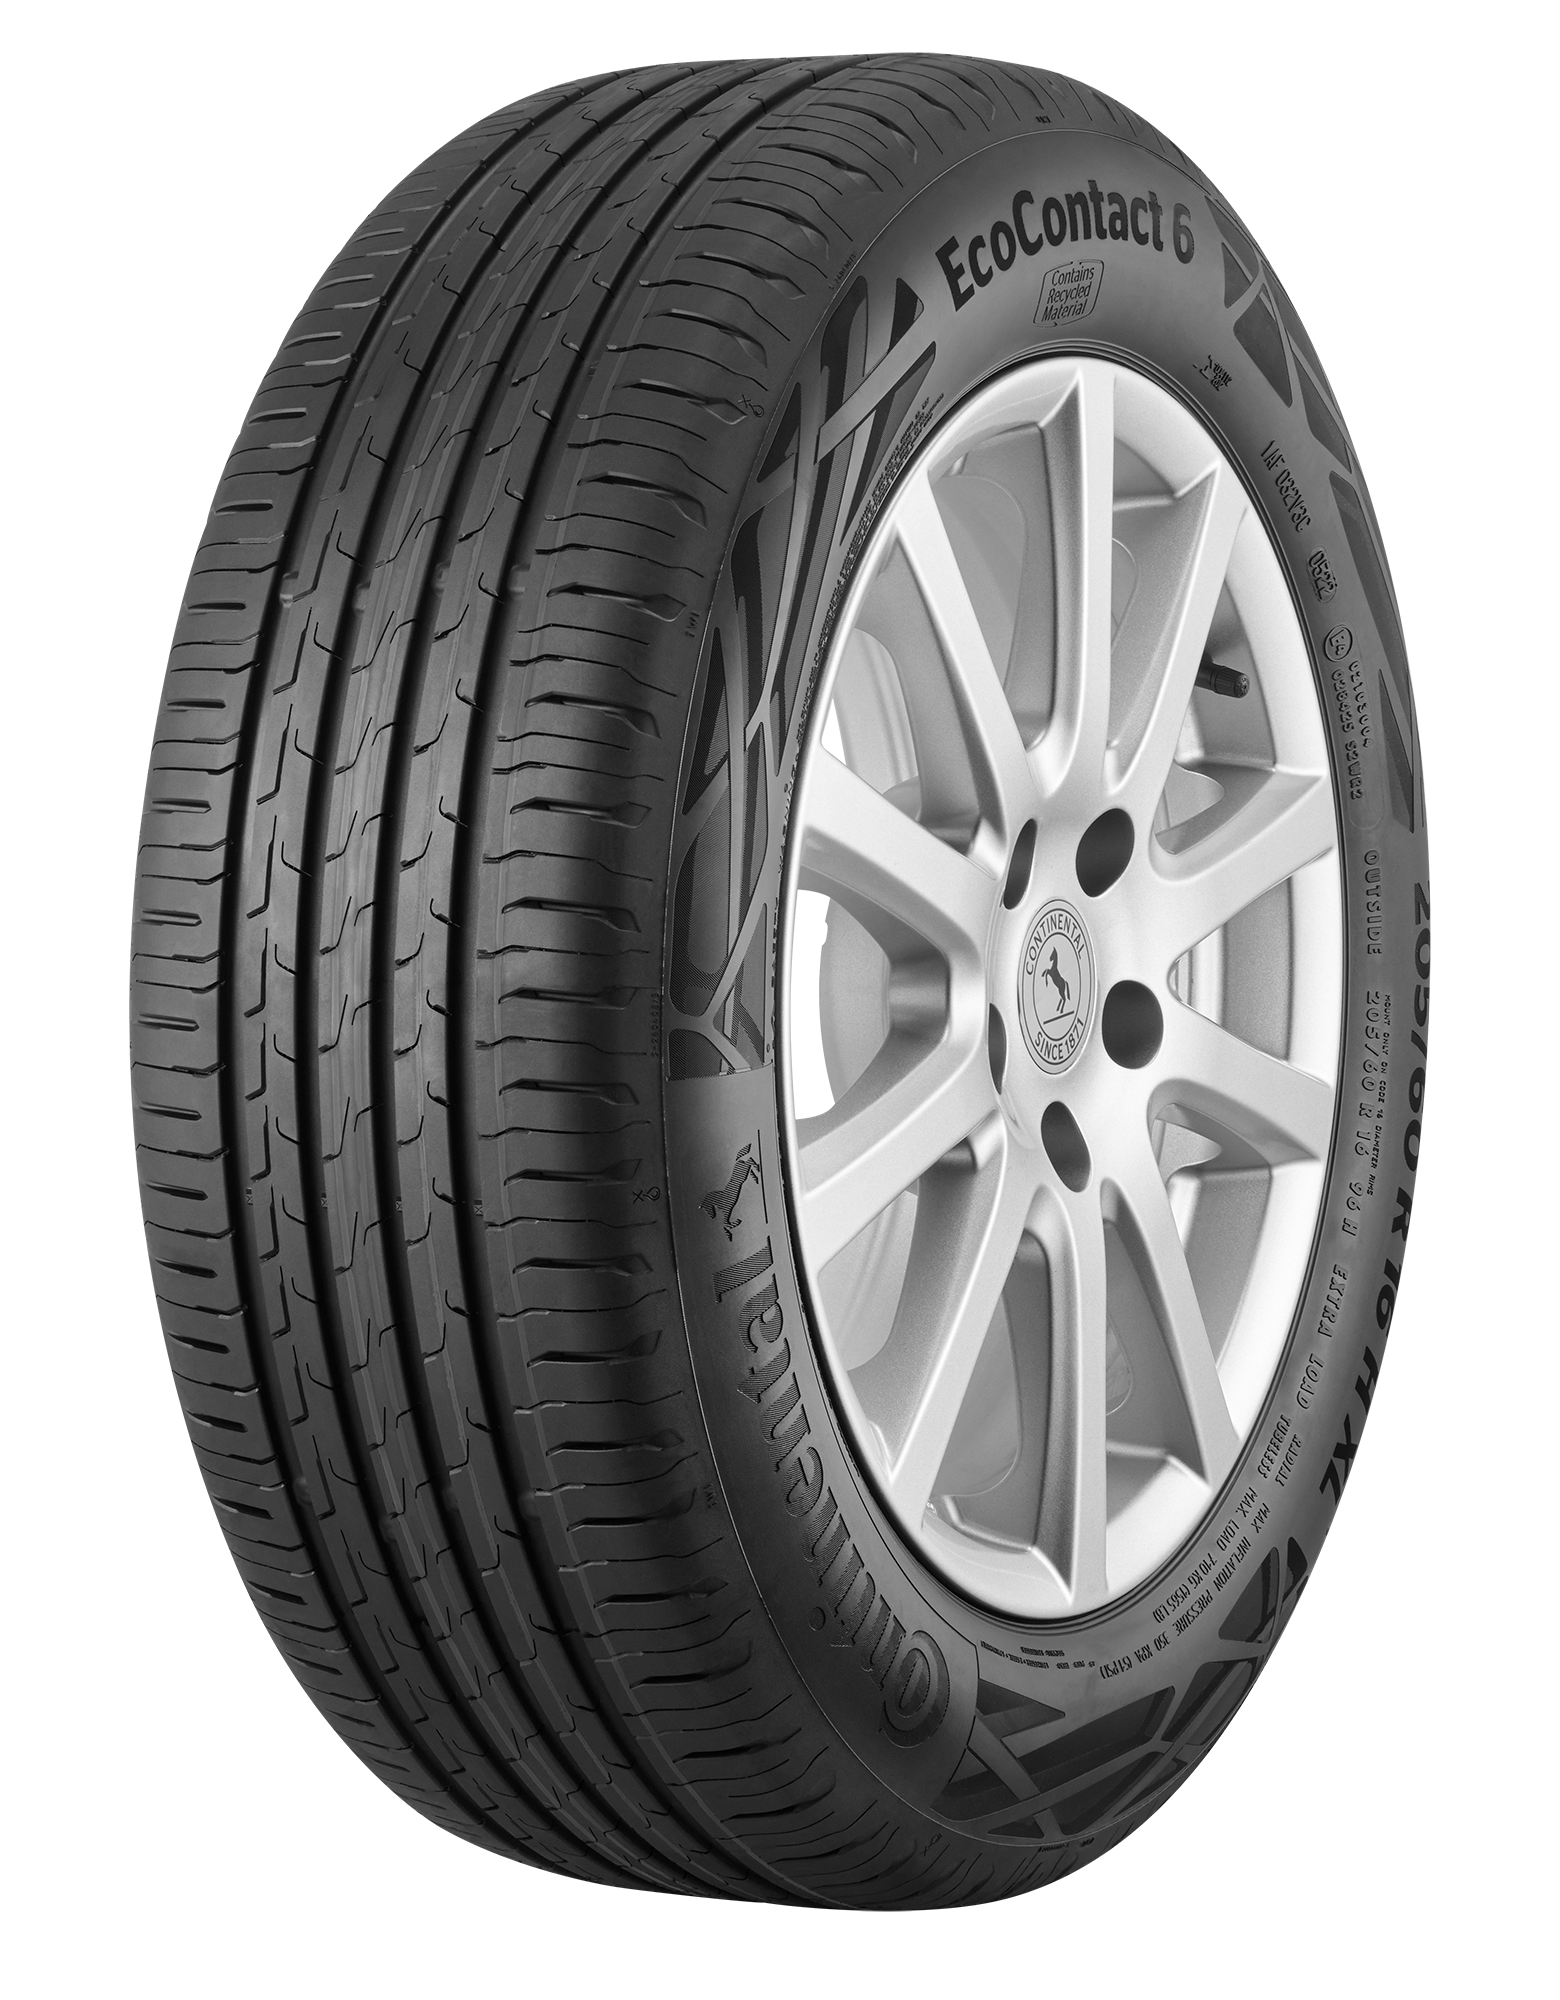 - Recycled Polyester Launches with Continental Continental AG First Tires Bottles PET from Made